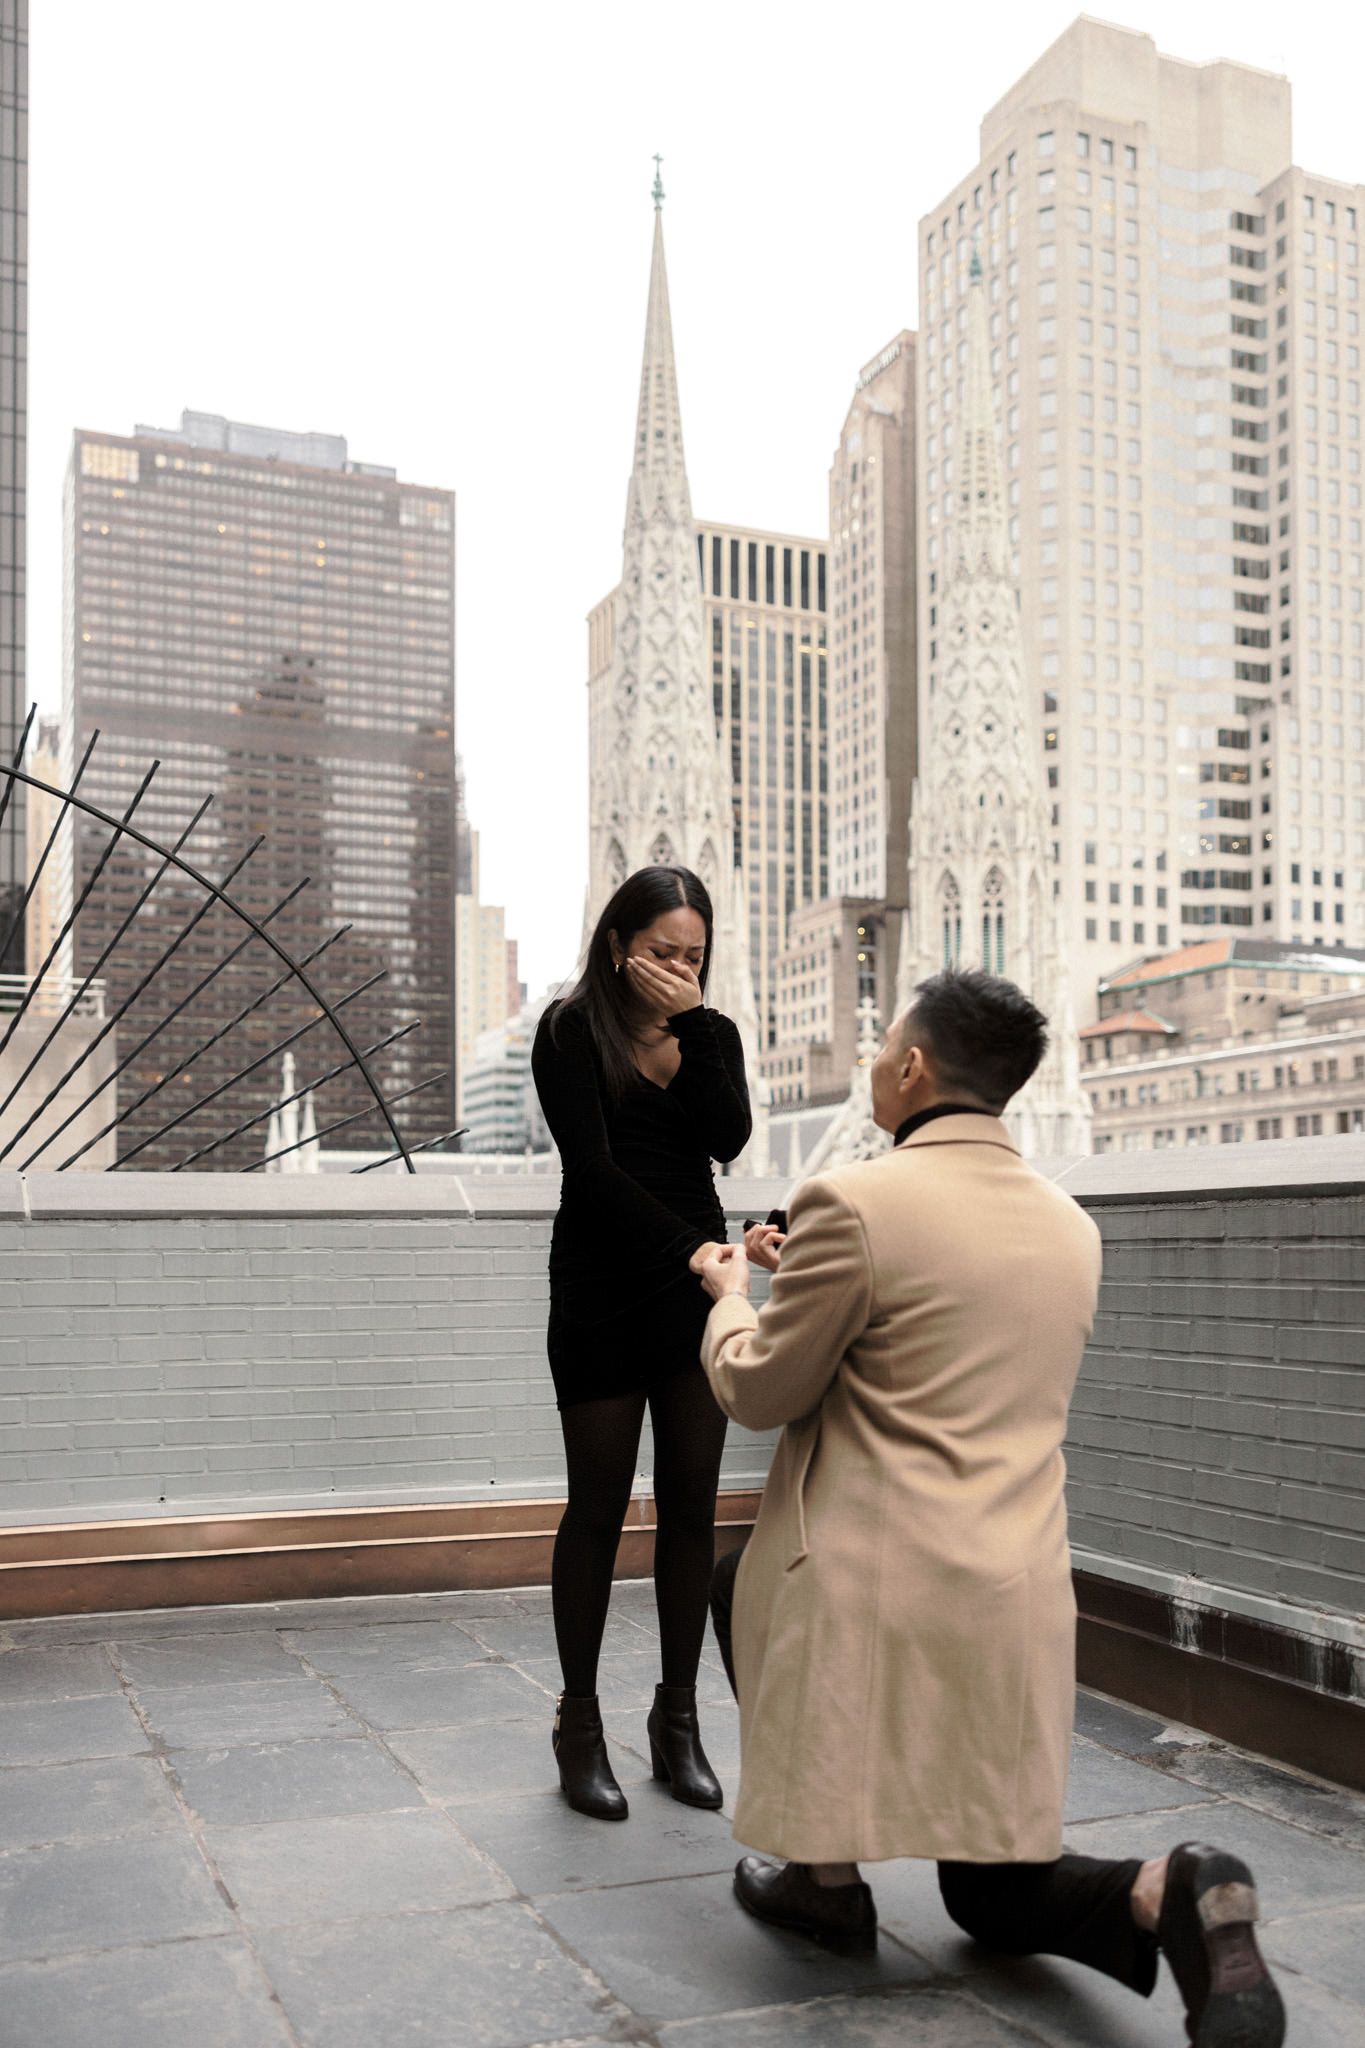 The man is down on one knee, showing his future fiancée the ring while the woman is emotional. Proposal in NYC image by Jenny Fu Studio